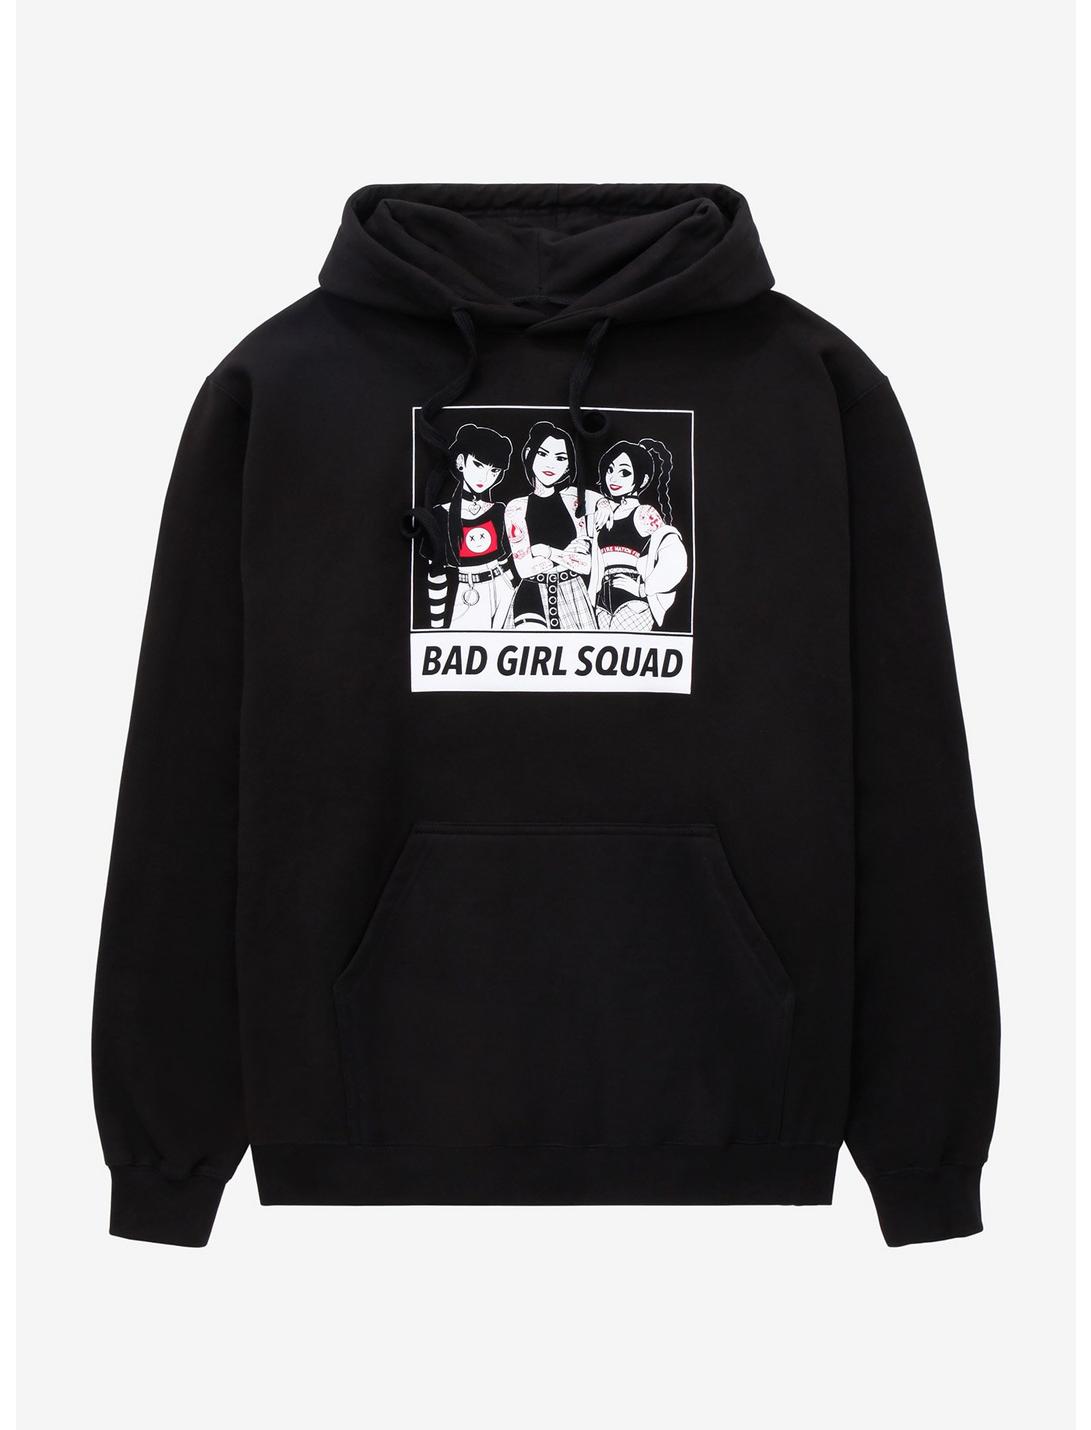 Avatar: The Last Airbender Bad Girl Squad Hoodie - BoxLunch Exclusive, BLACK, hi-res